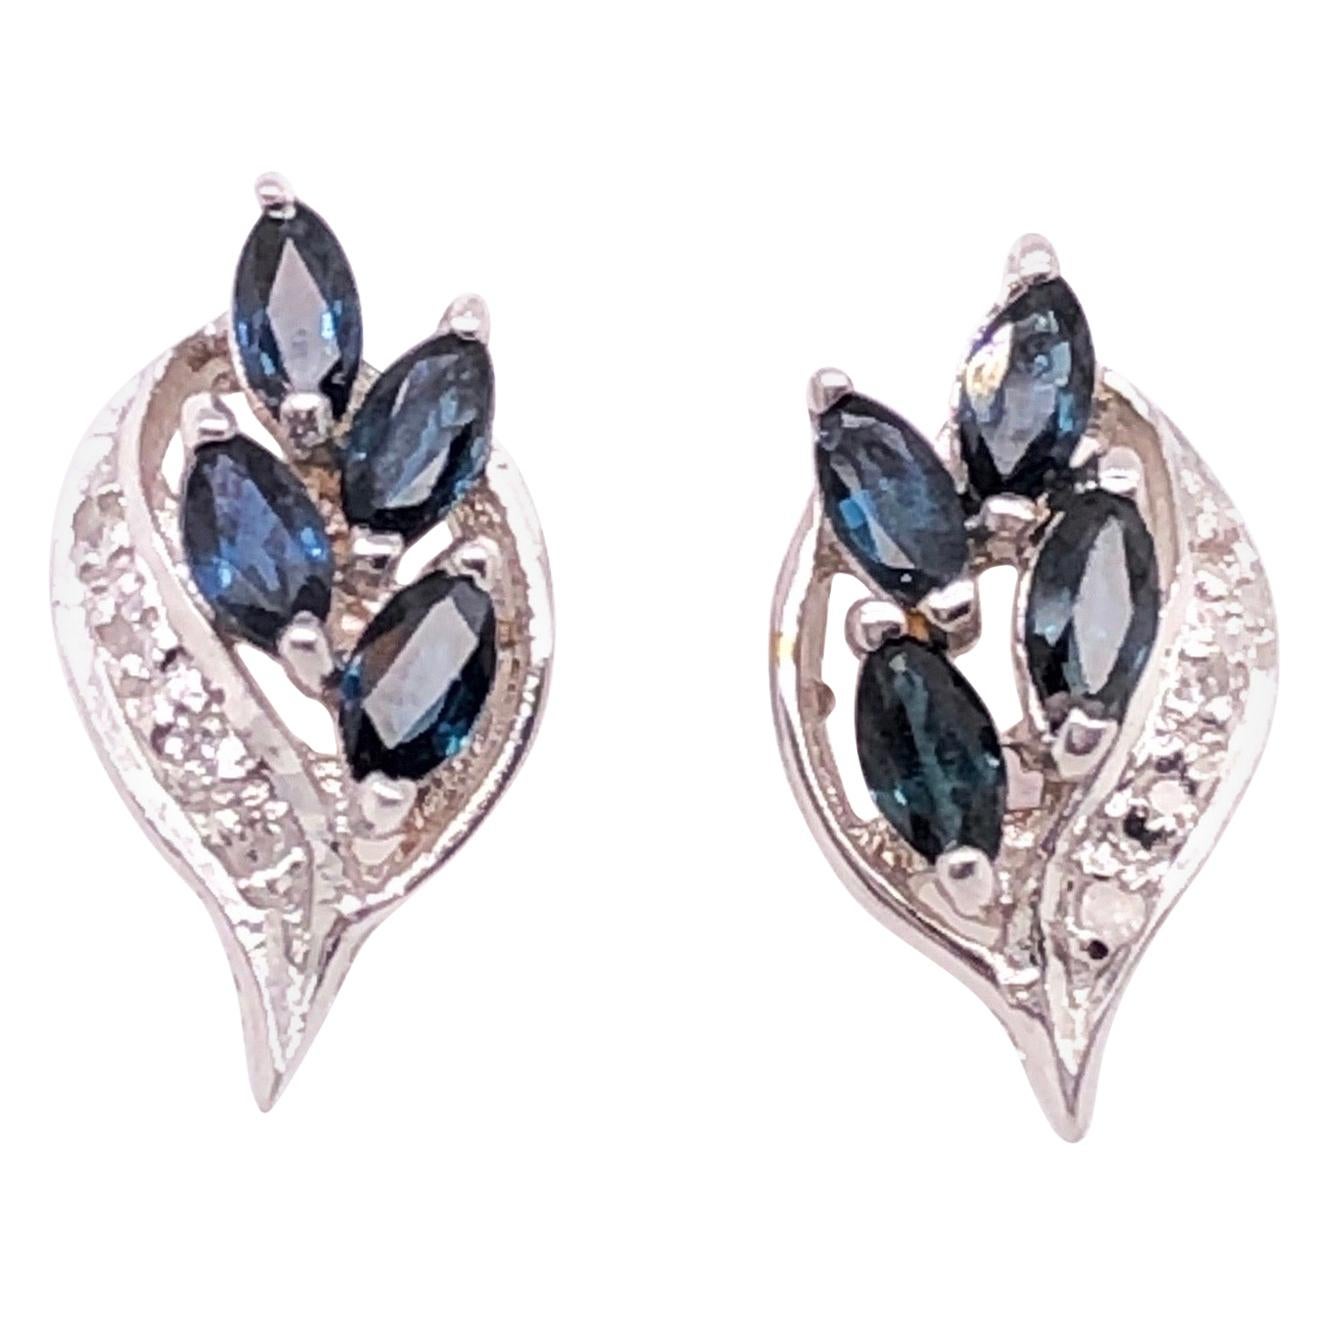 18 Karat White Gold Stud Earrings with Sapphires and Diamonds